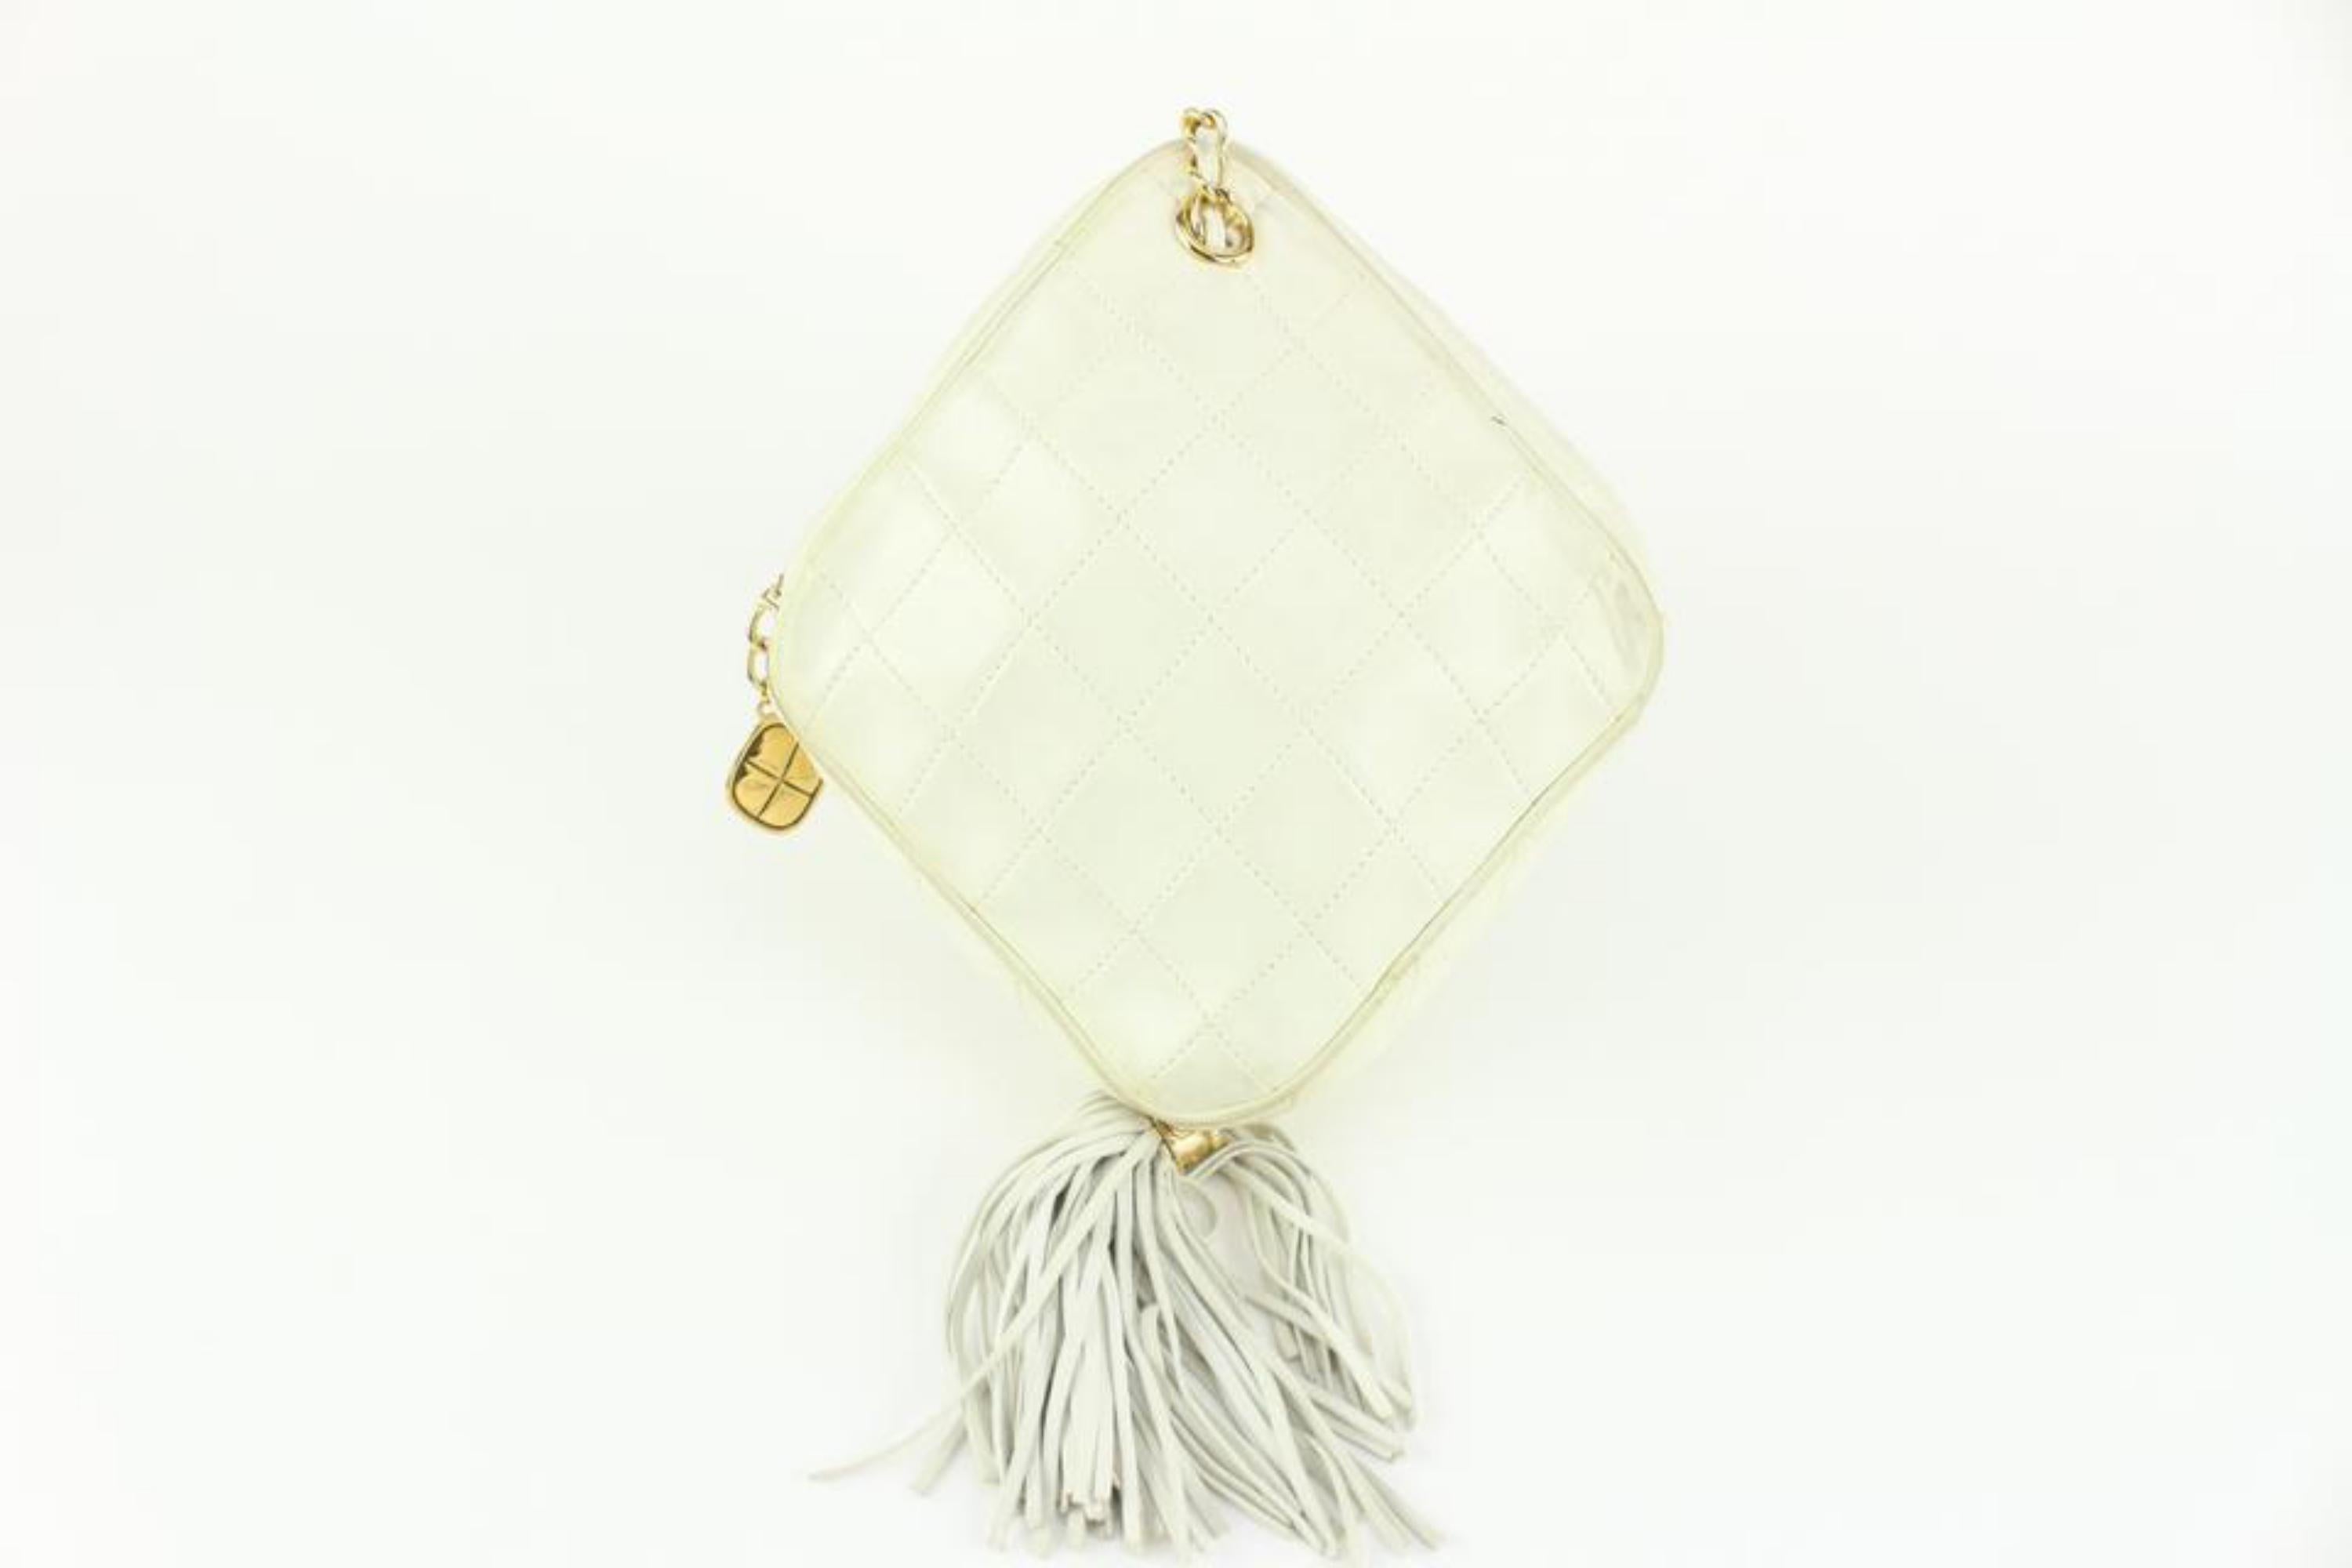 Women's Chanel White Quilted Leather Diamond Clutch on Chain Tassel Bag 1123c30 For Sale